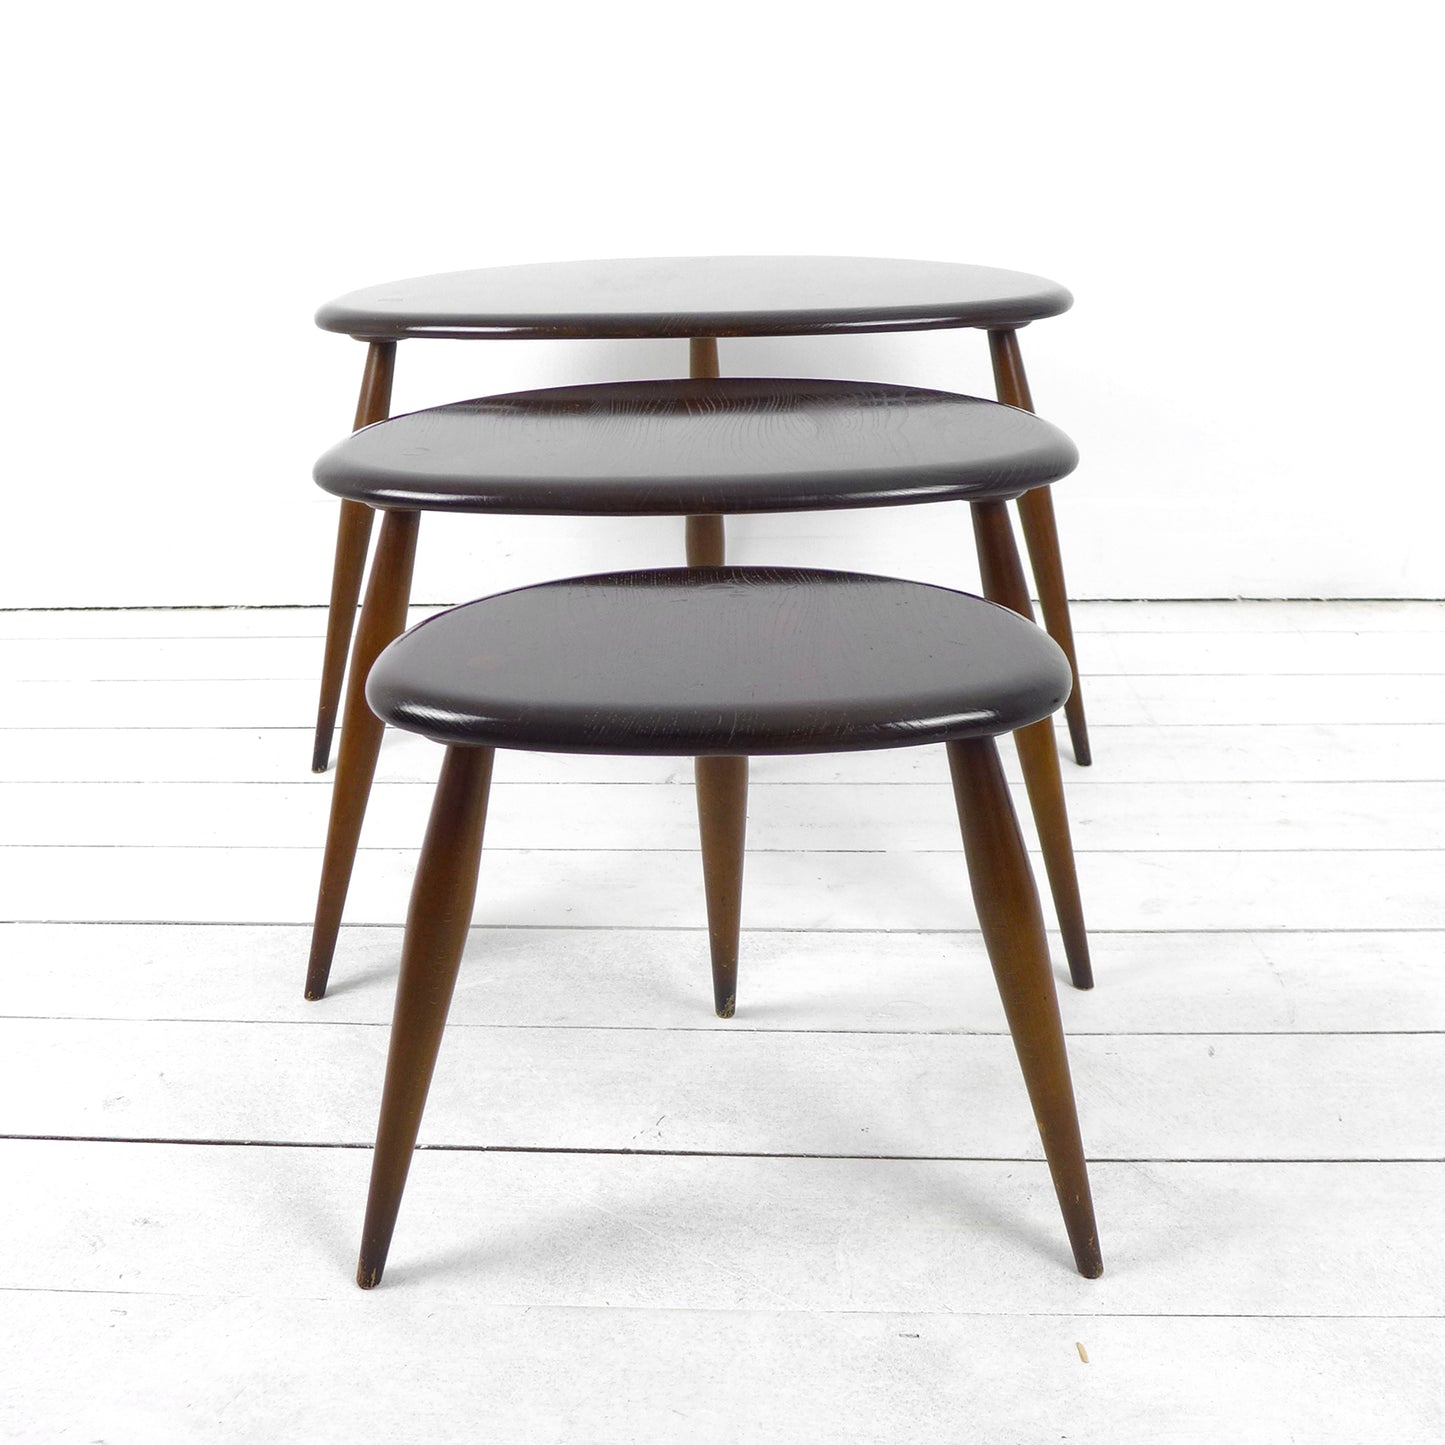 Vintage Ercol Pebble Tables - Nest of 3 in Dark Tone